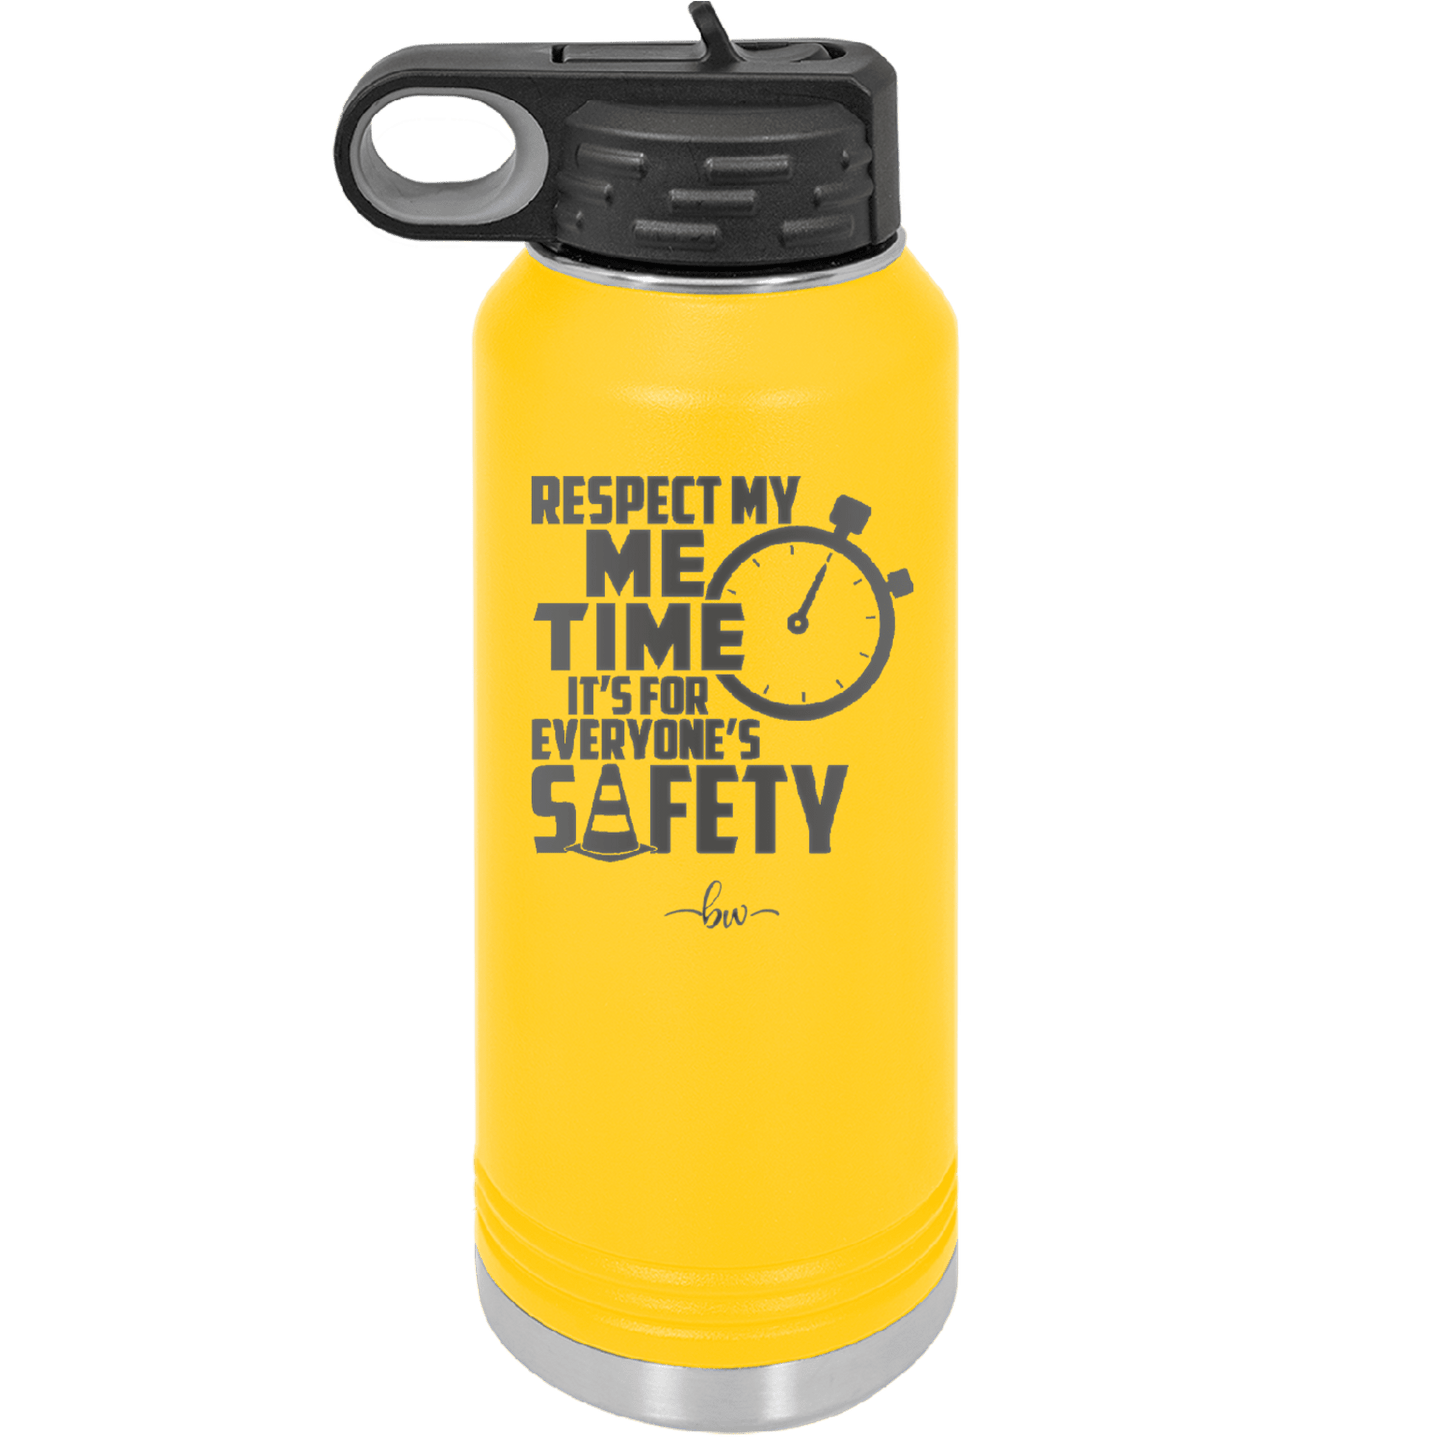 Respect My Me Time It is For Everyones Safety 2 - Laser Engraved Stainless Steel Drinkware - 1693 -